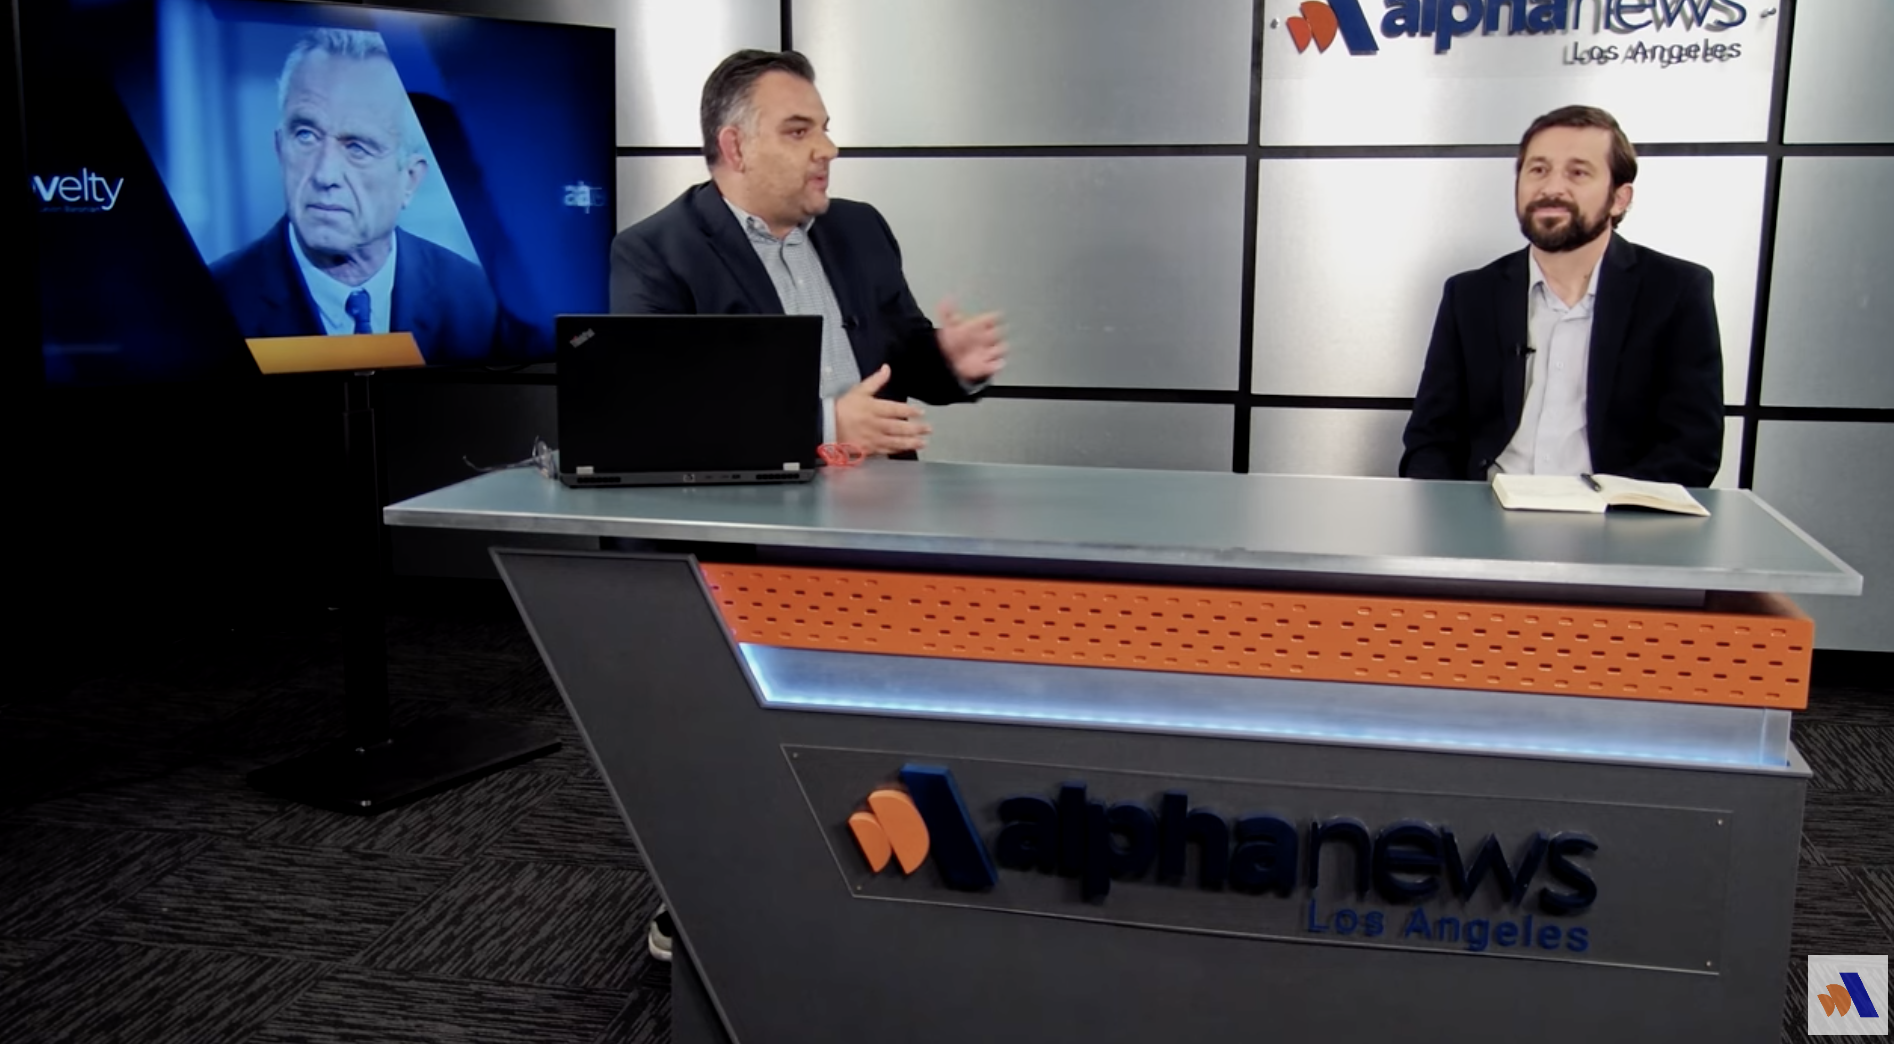 Levon Baronian's "Novelty" Airs Debut Episode on Alpha News with Guest Rostom Sarkissian